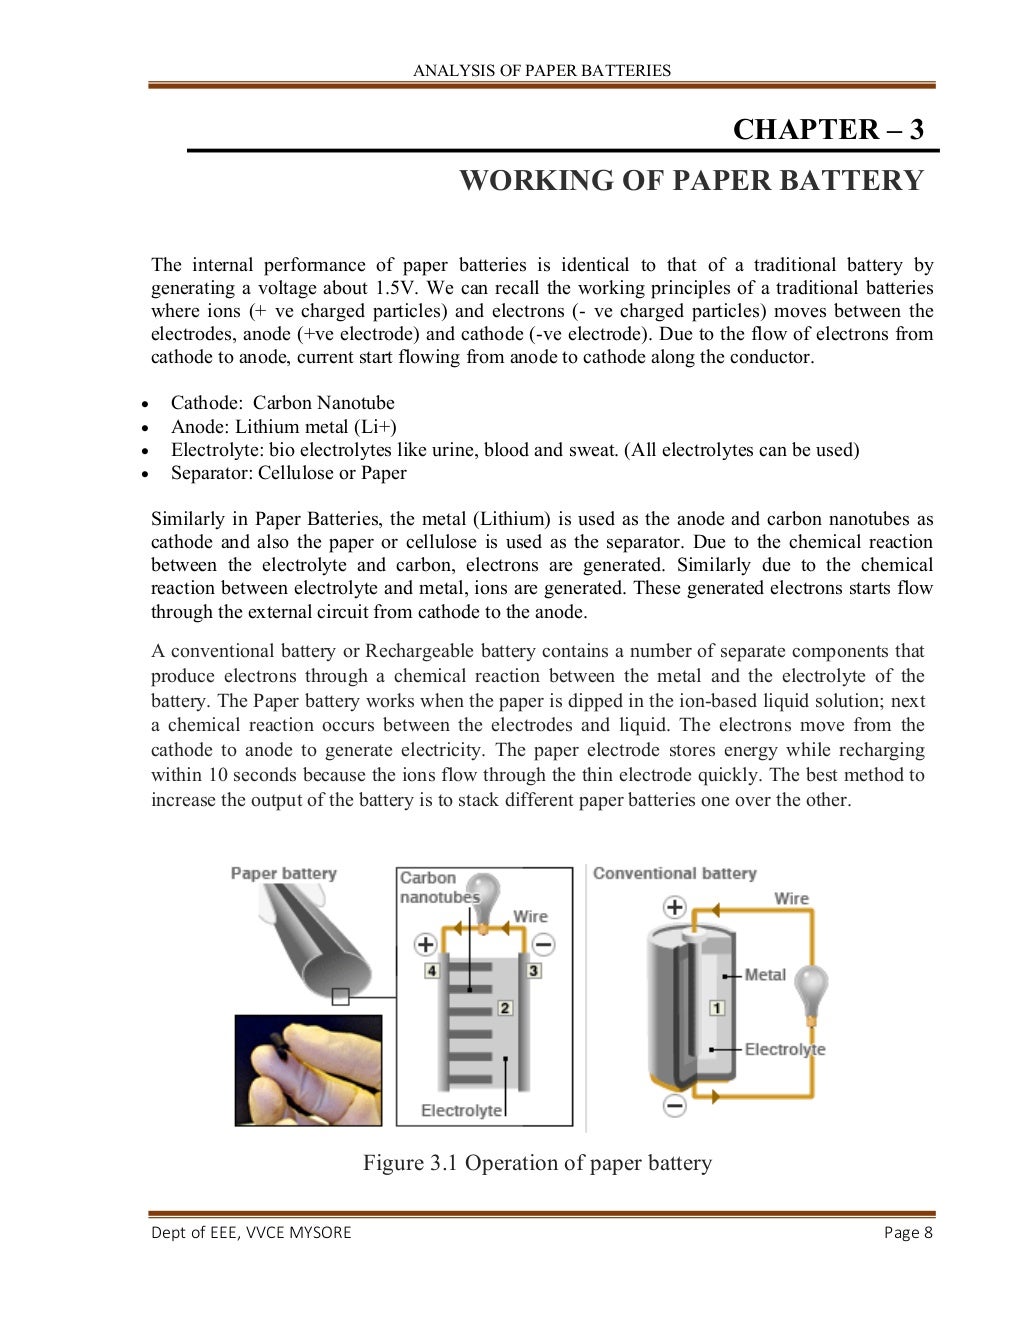 literature review on paper battery